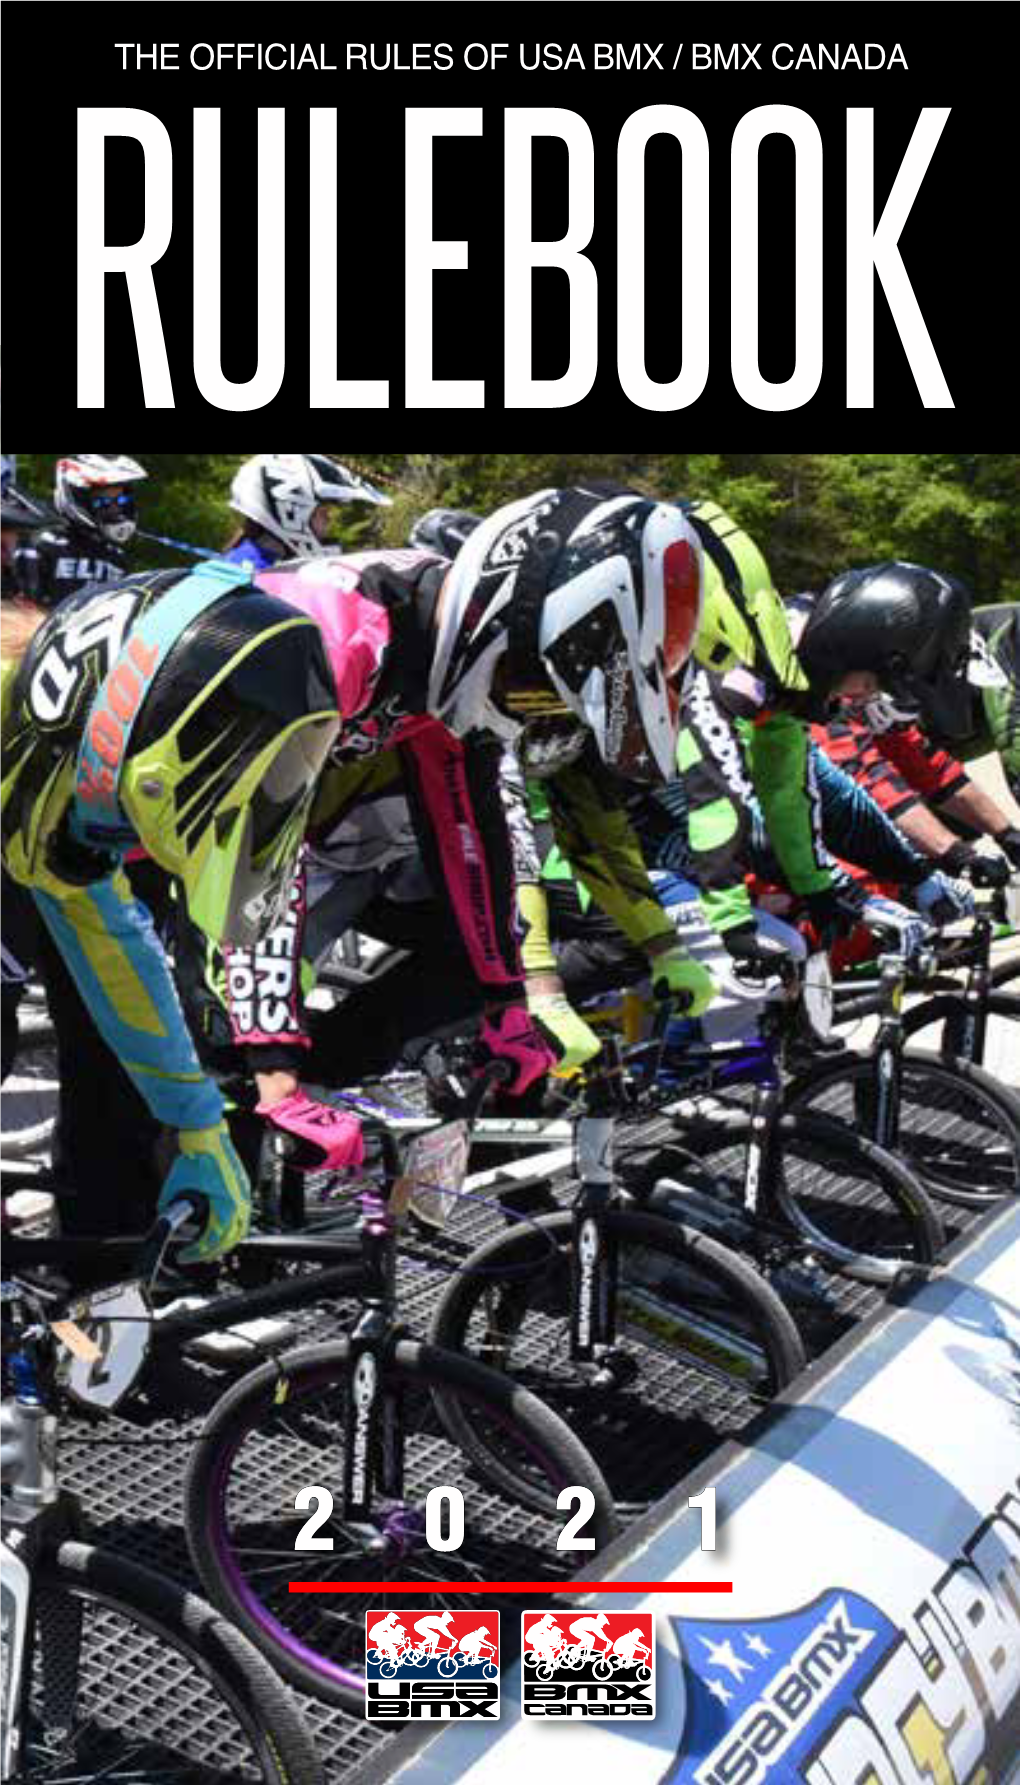 The Official Rules of Usa Bmx / Bmx Canada Rulebook